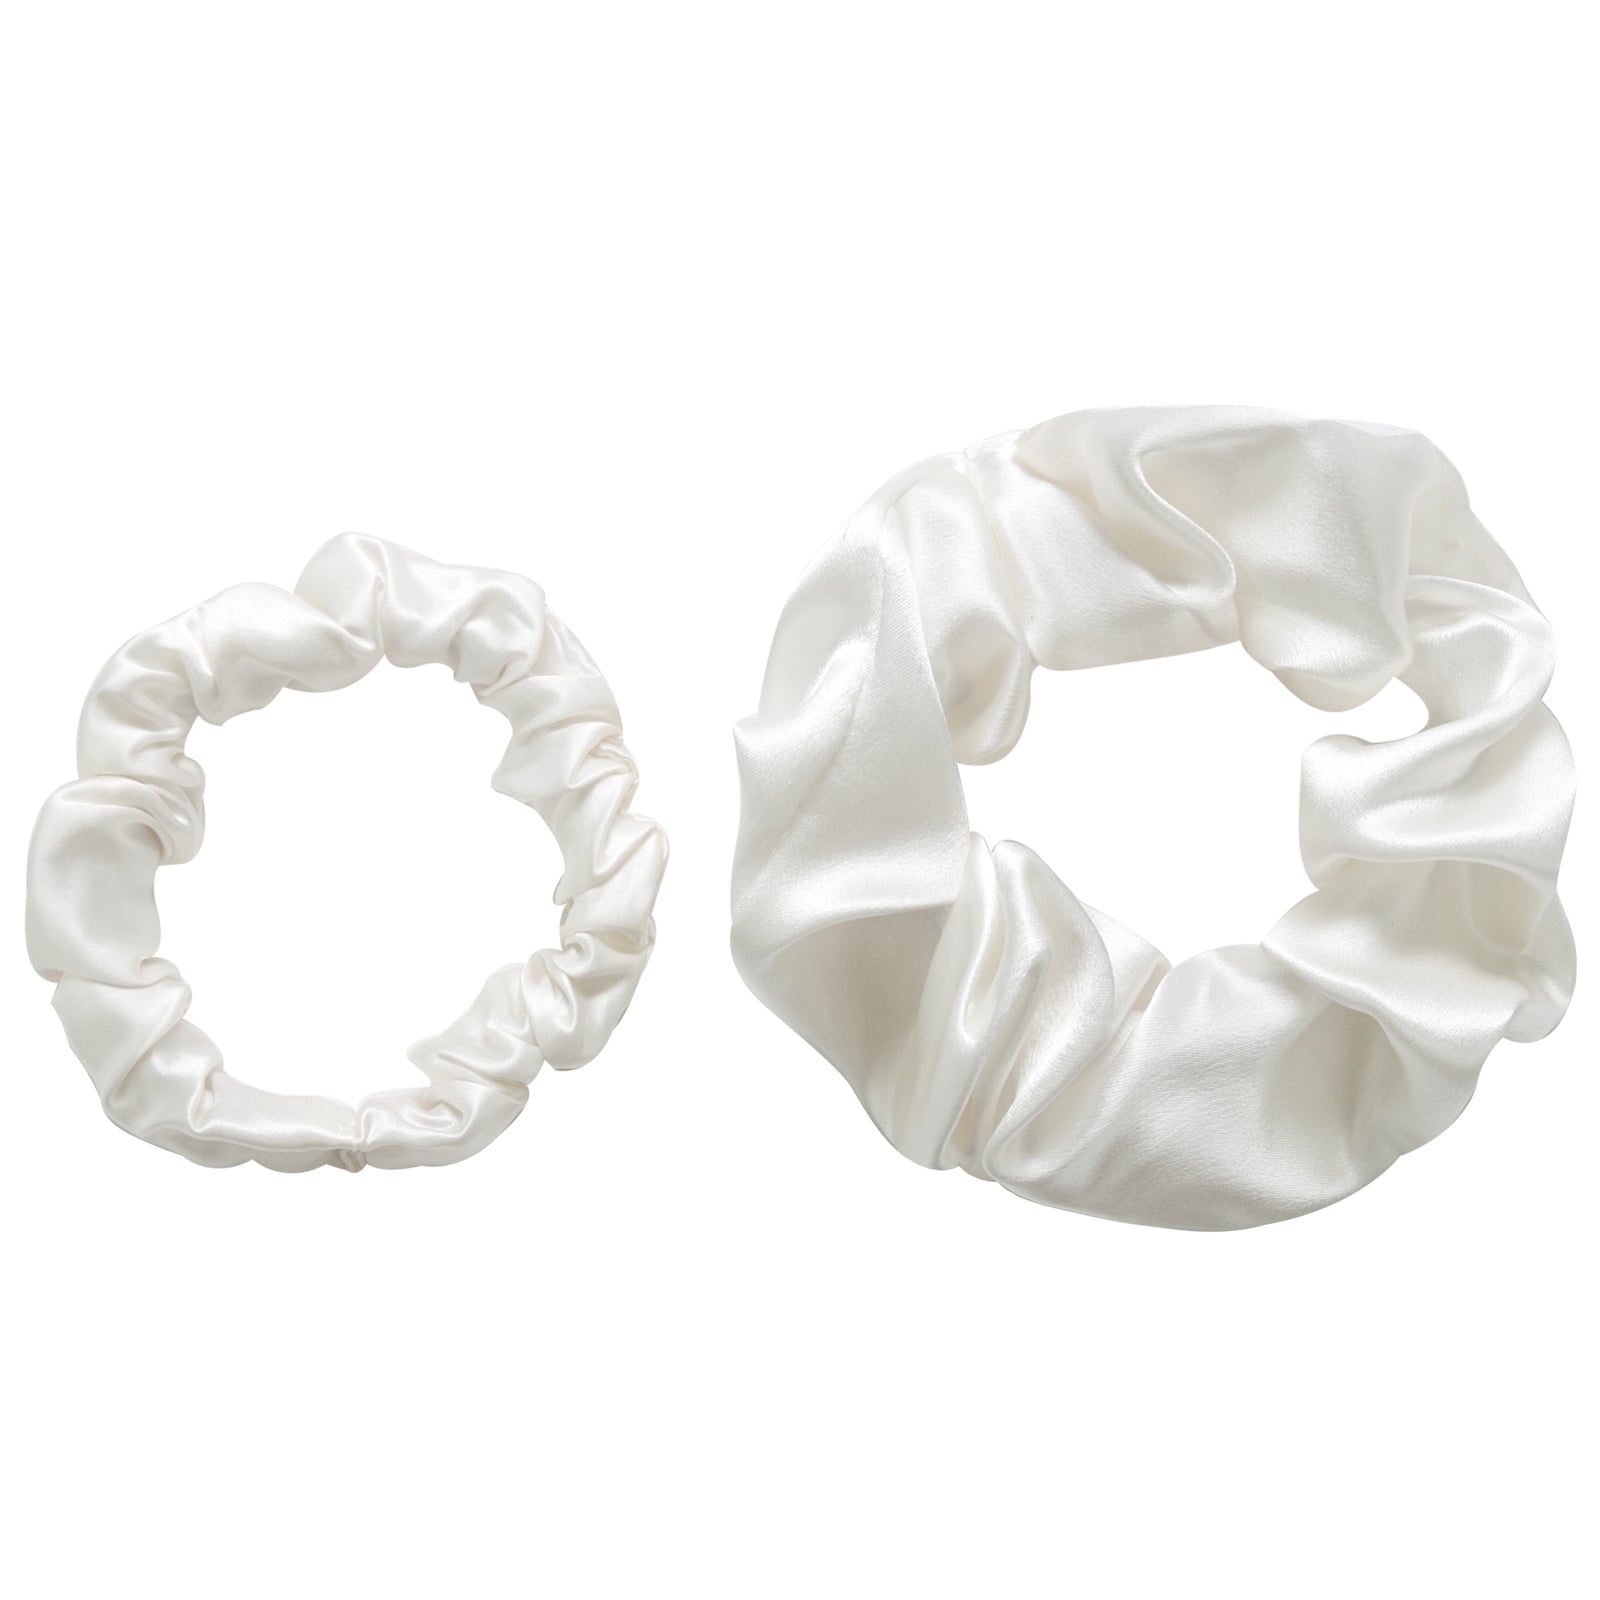 Pure Silk Scrunchie Pack - 1 thick 1 thin - Holds hair without damage, no snags, anti-pulling (Black